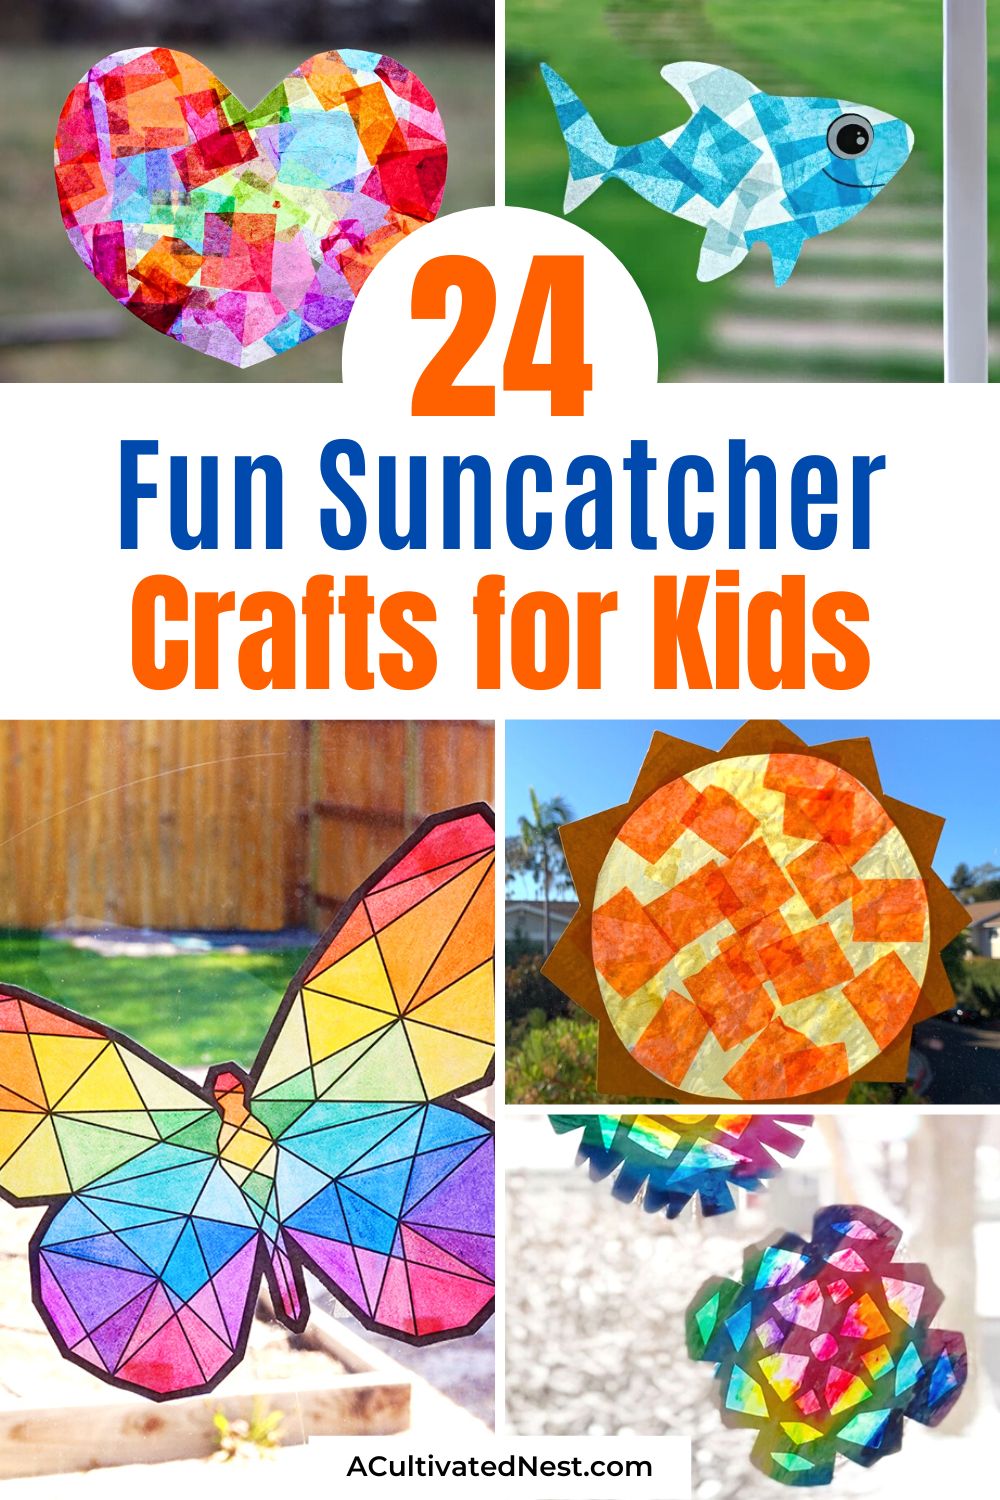 24 Fun Sun Catcher Crafts for Kids- Let your kids' imagination shine through with these joyful sun catcher crafts for kids. From dazzling butterflies to whimsical snowflakes, these crafts are perfect for brightening up any day and creating cherished memories. | #DIYKidsCrafts #SunCatchers #suncatchers #craftsForKids #ACultivatedNest